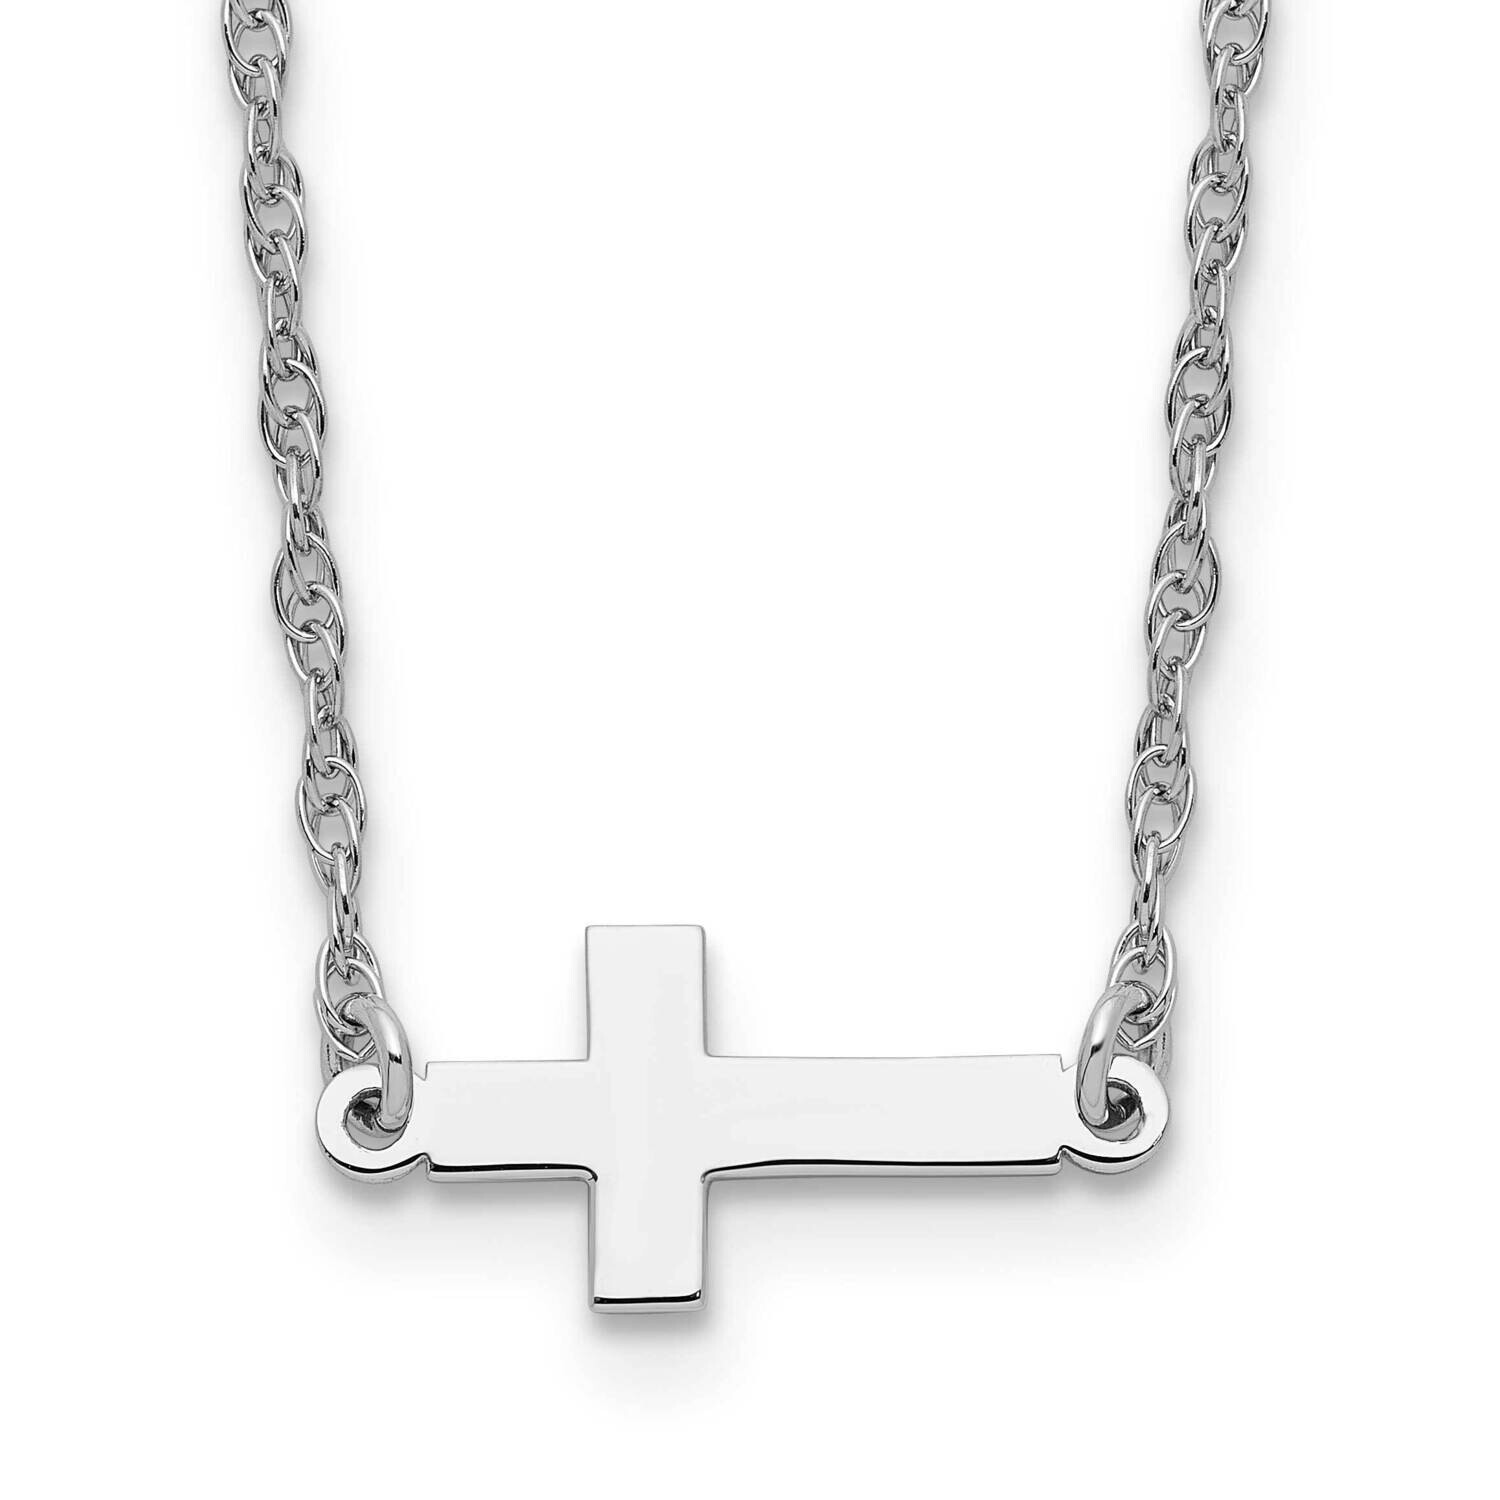 Small Sideways Cross Necklace Sterling Silver Rhodium-Plated QG3469-18